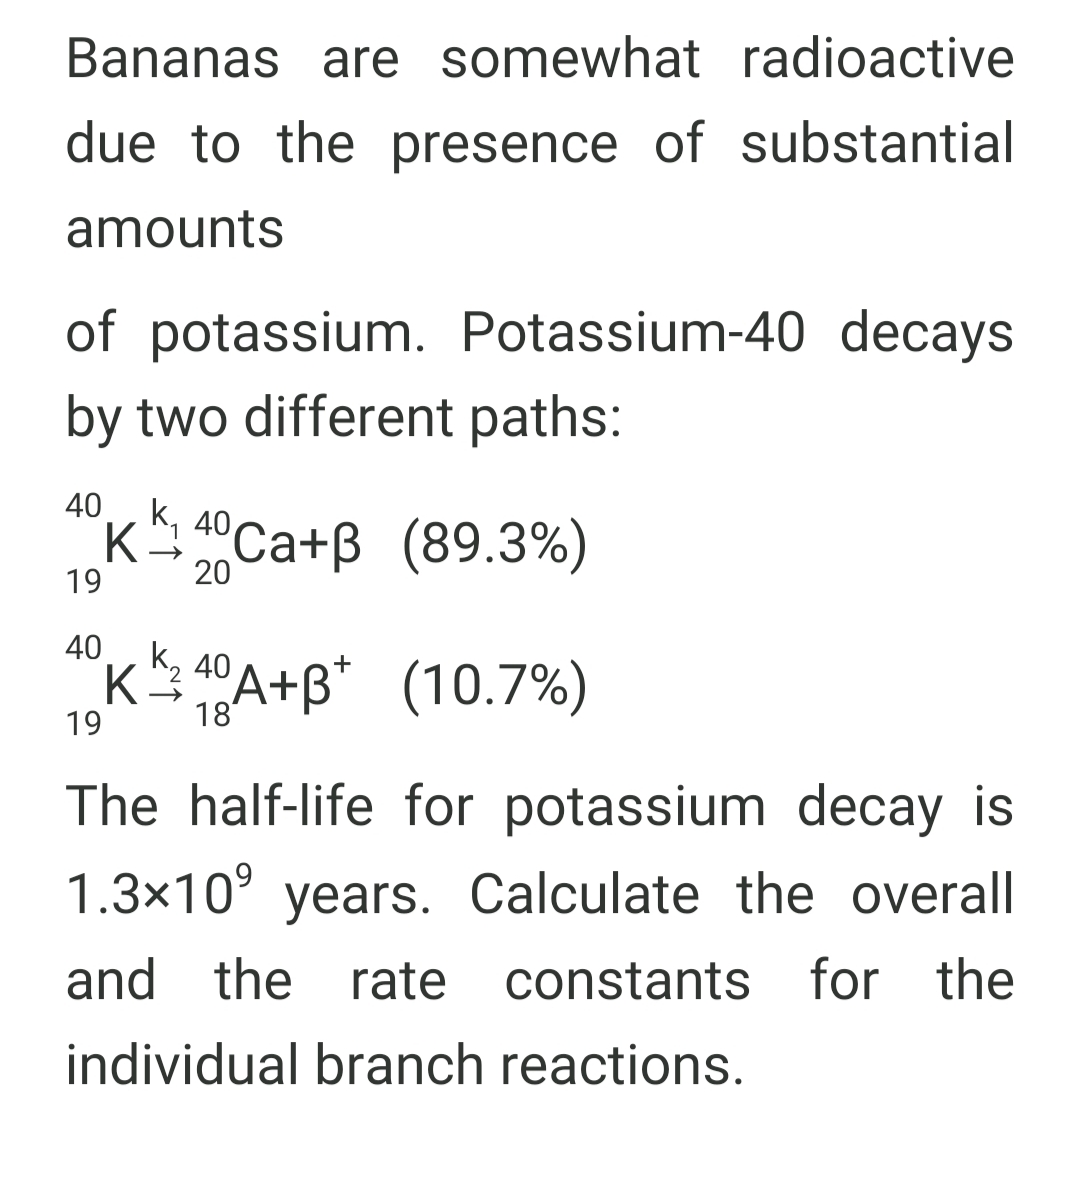 Bananas are somewhat radioactive
due to the presence of substantial
amounts
of potassium. Potassium-40 decays
by two different paths:
40
K 40Ca+B (89.3%)
1
19
20
40K k, 40 A+B* (10.7%)
19
18
The half-life for potassium decay is
1.3x10° years. Calculate the overall
and the rate constants for the
individual branch reactions.
